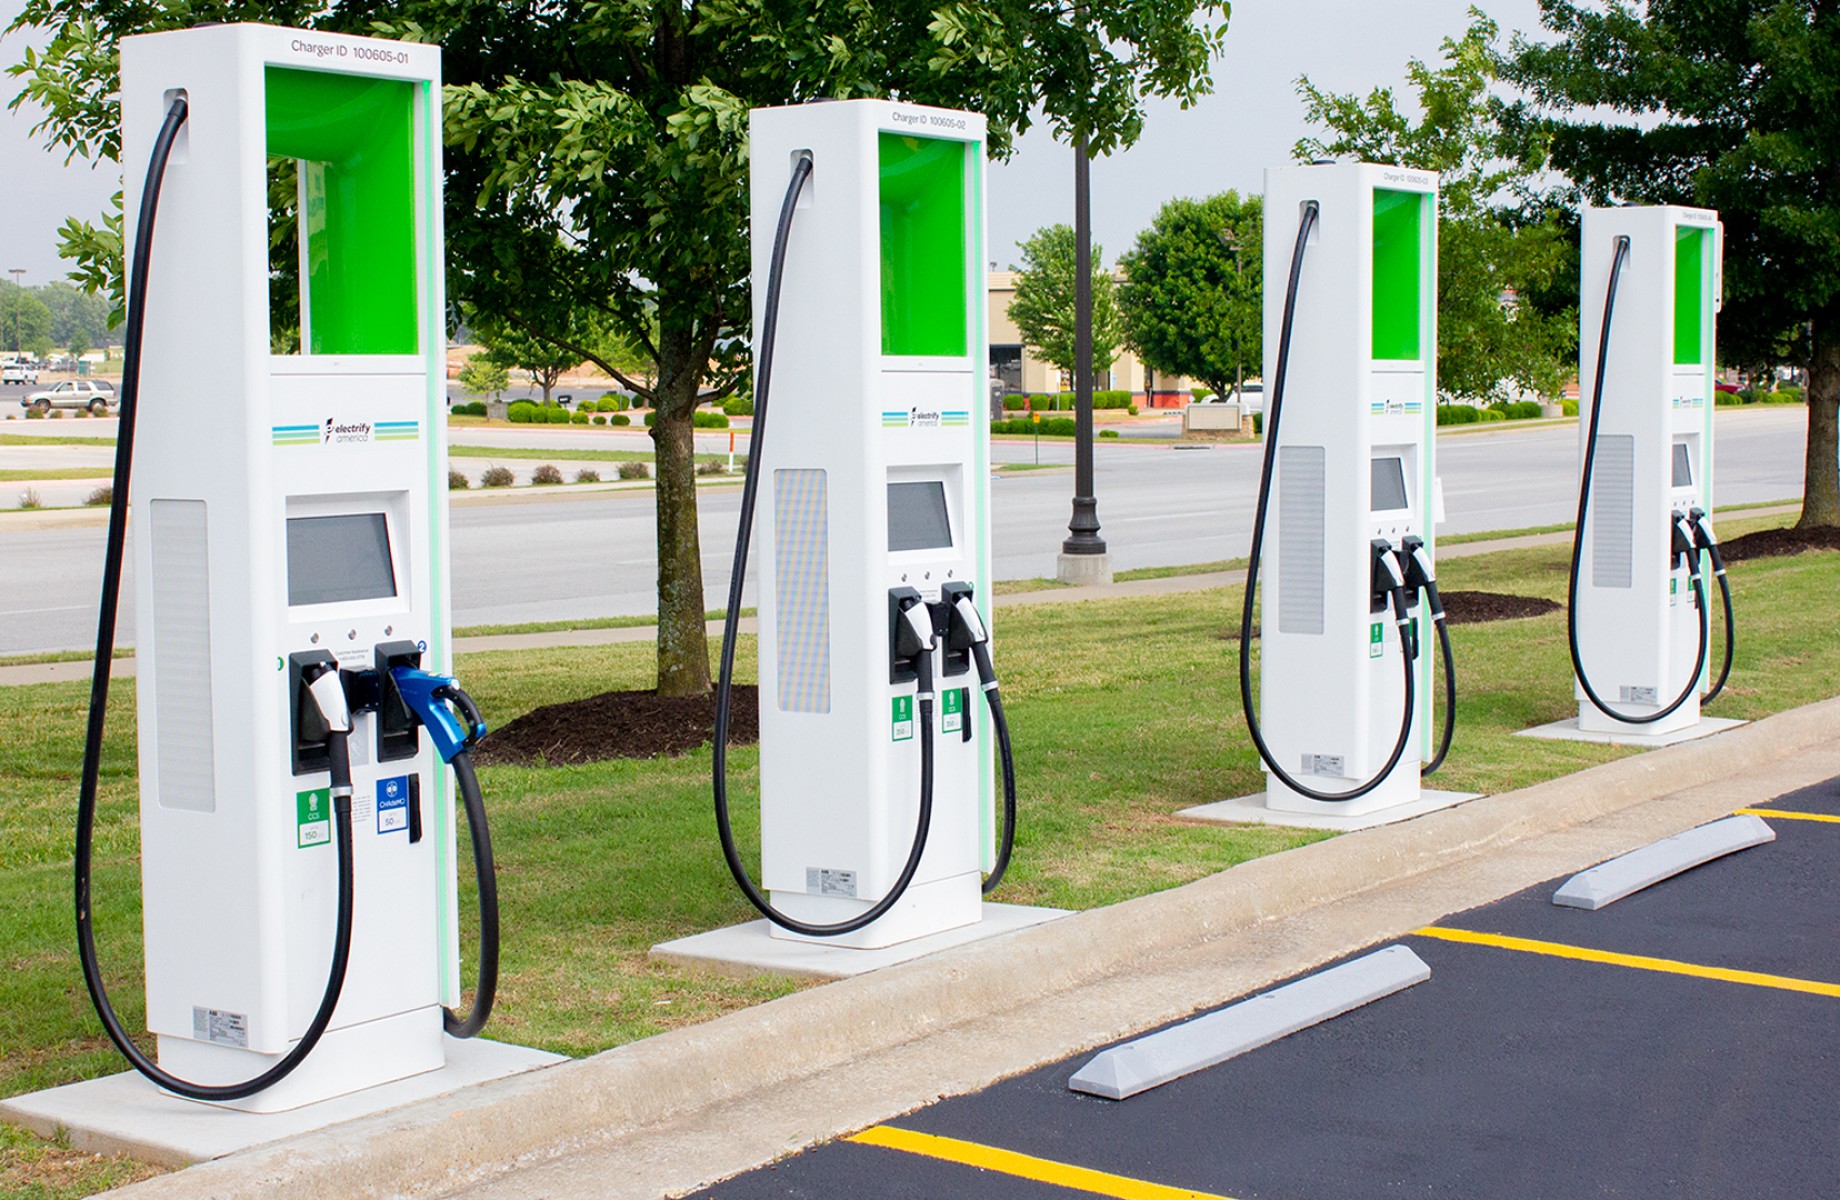 electrify-america-installs-400-charging-stations-twice-as-fast-as